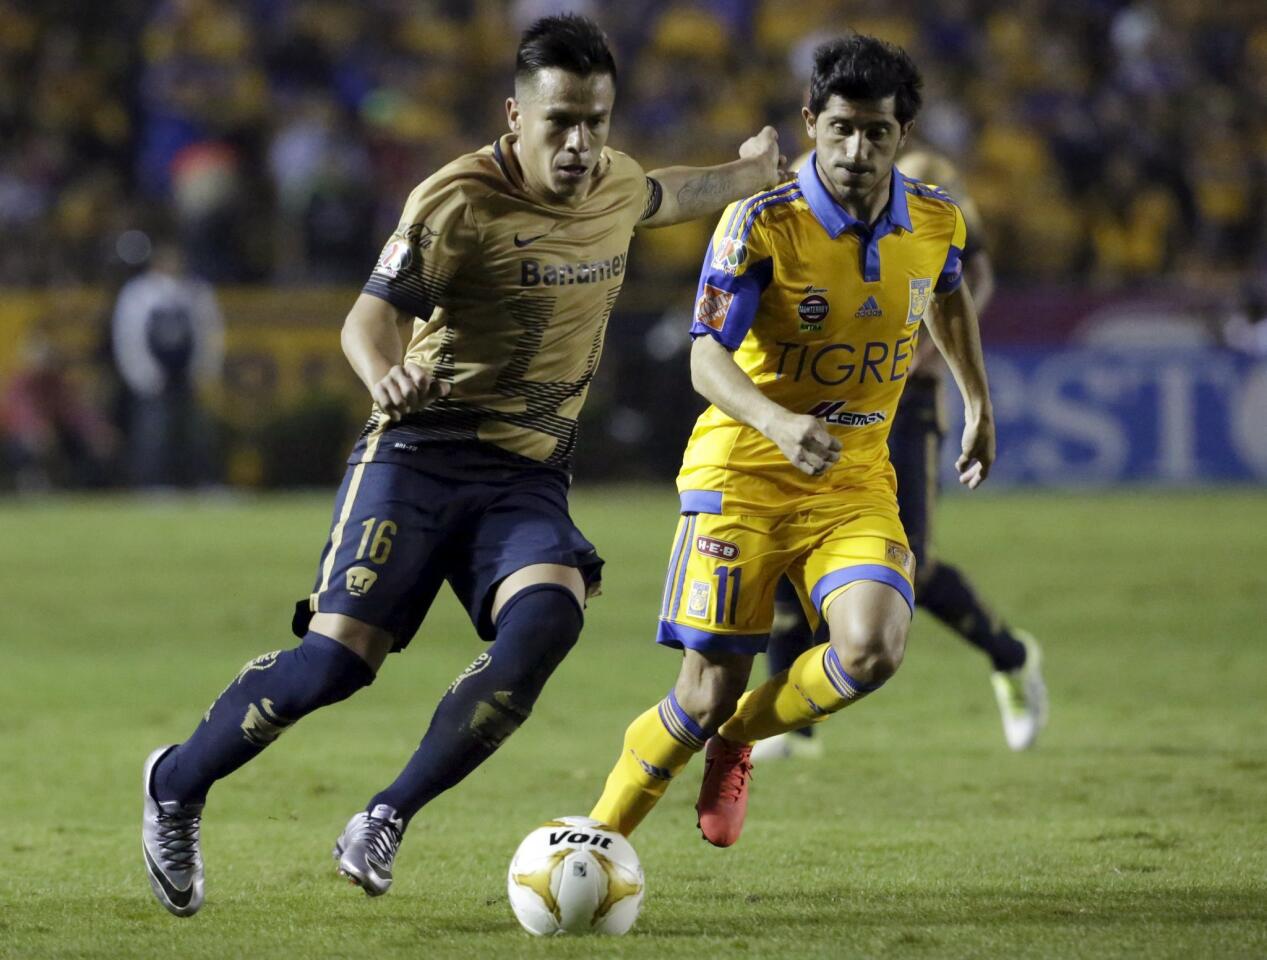 Football Soccer - Tigres v Pumas - The first leg of their Mexican first division final soccer match